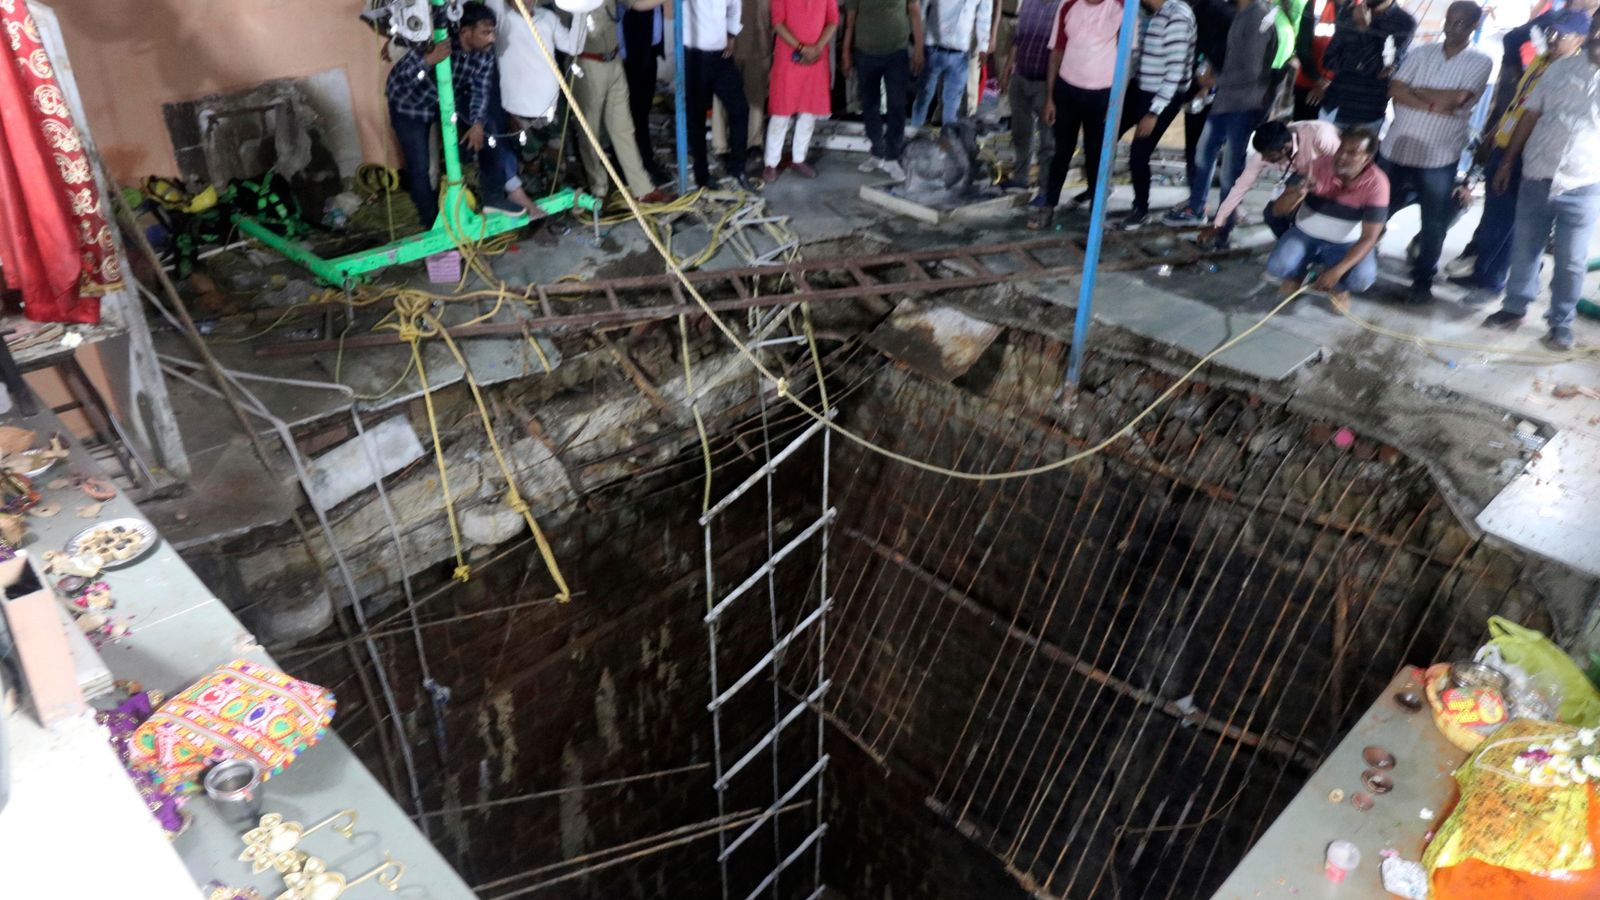 At least 35 people killed after falling into well during celebration at Indian temple